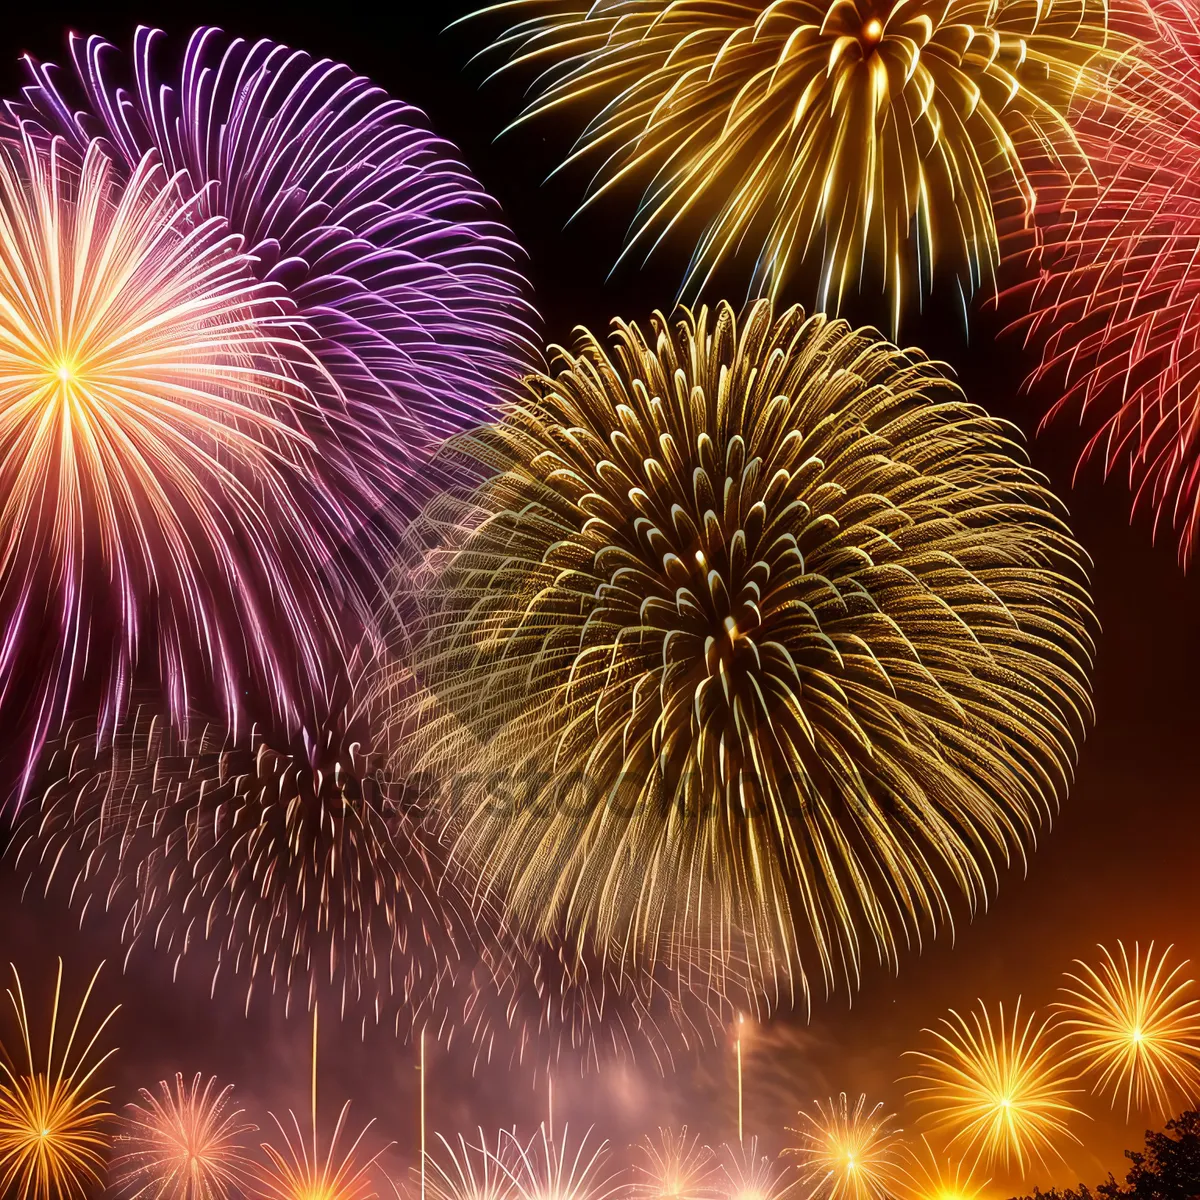 Picture of Vibrant Fireworks Illuminating the Night Sky